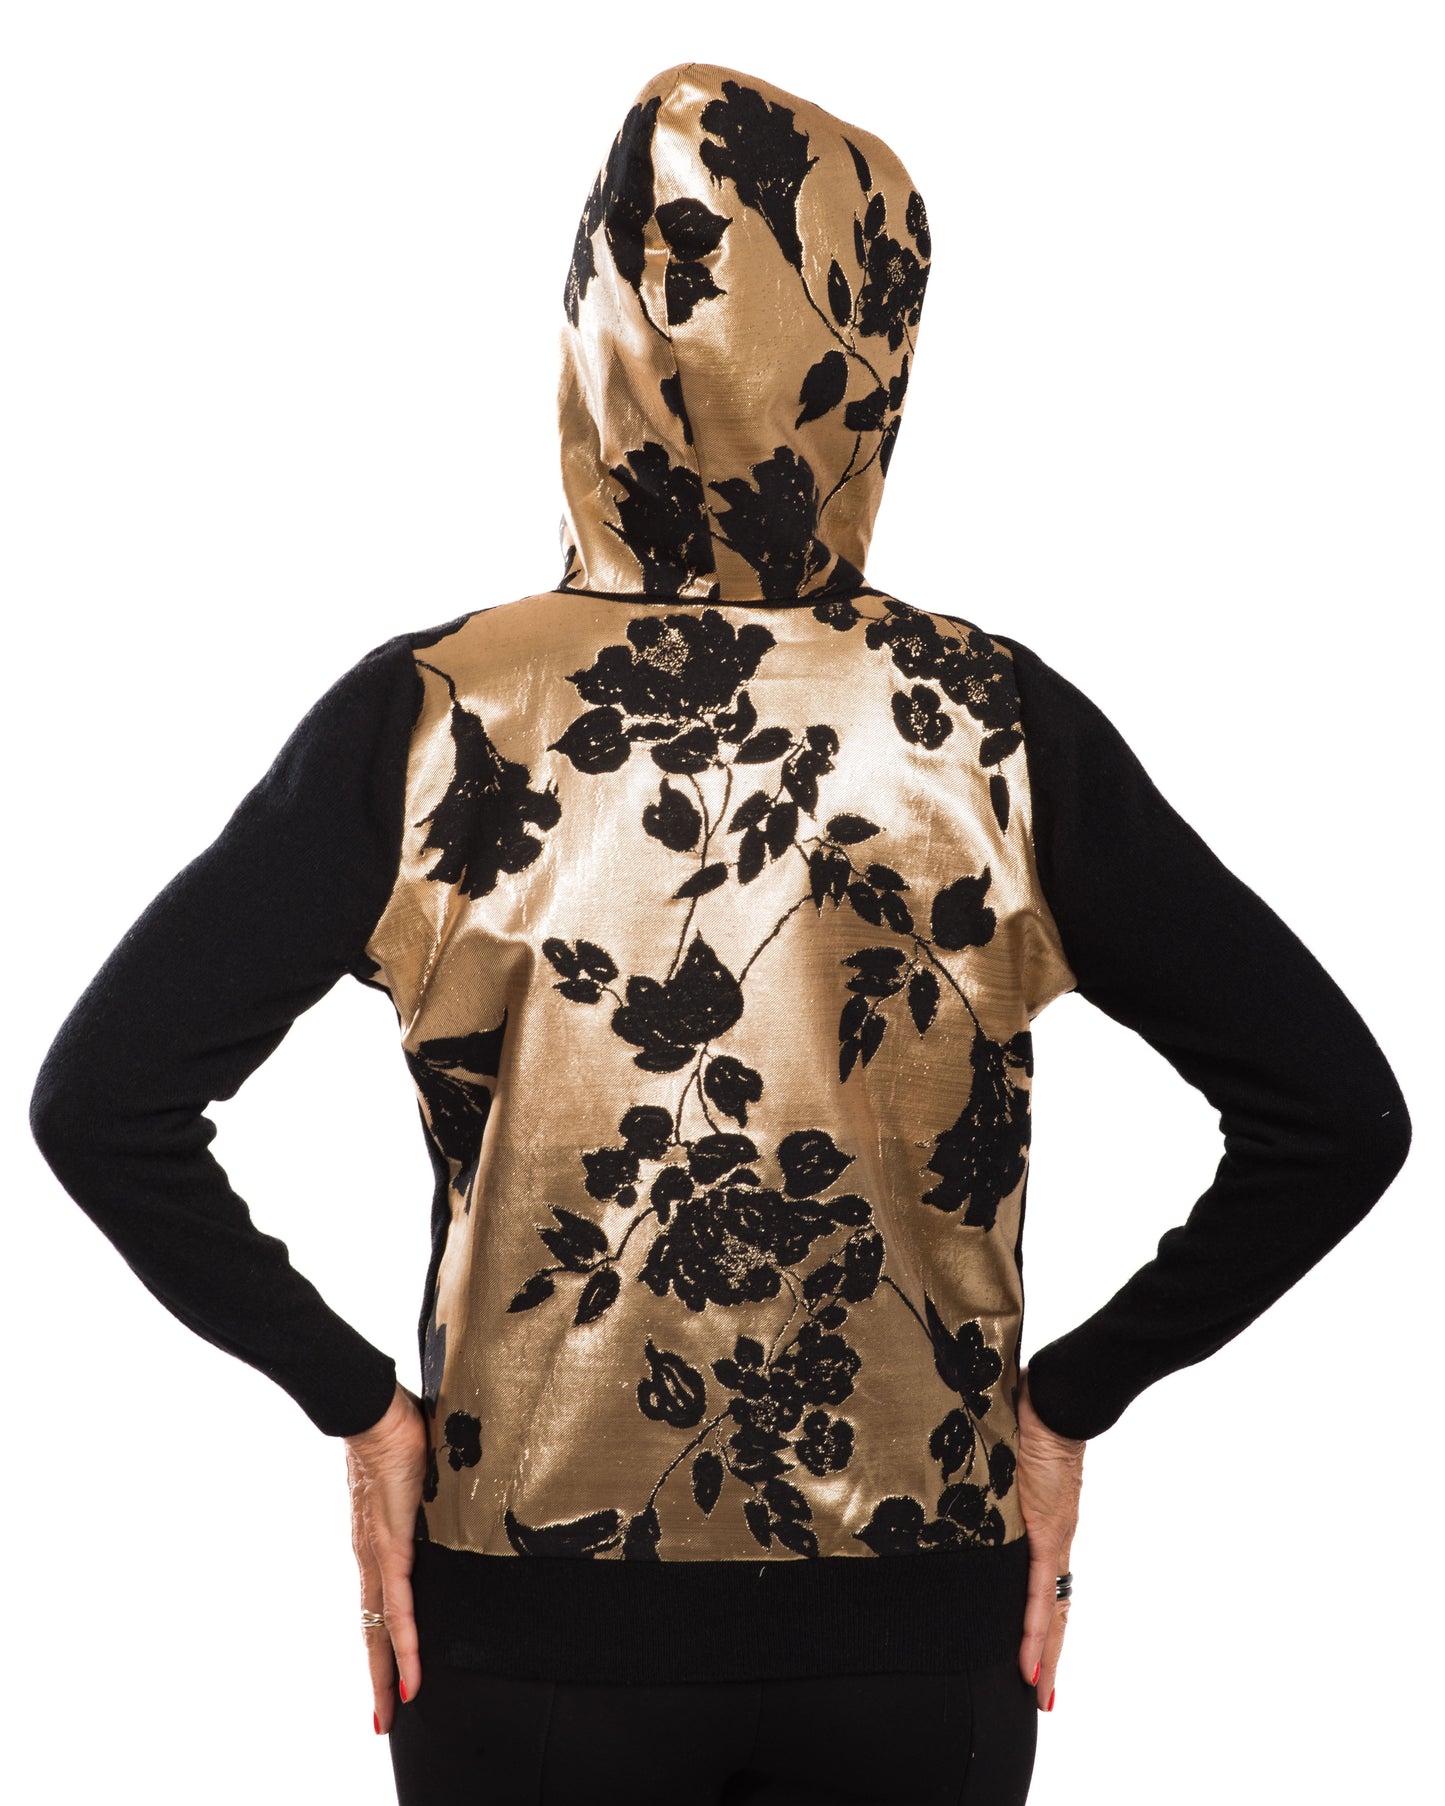 SMALL BLACK LONG SLEEVE CASHMERE HOODIE WITH BACK AND HOOD OF GOLD AND BLACK FLORAL BROCADE